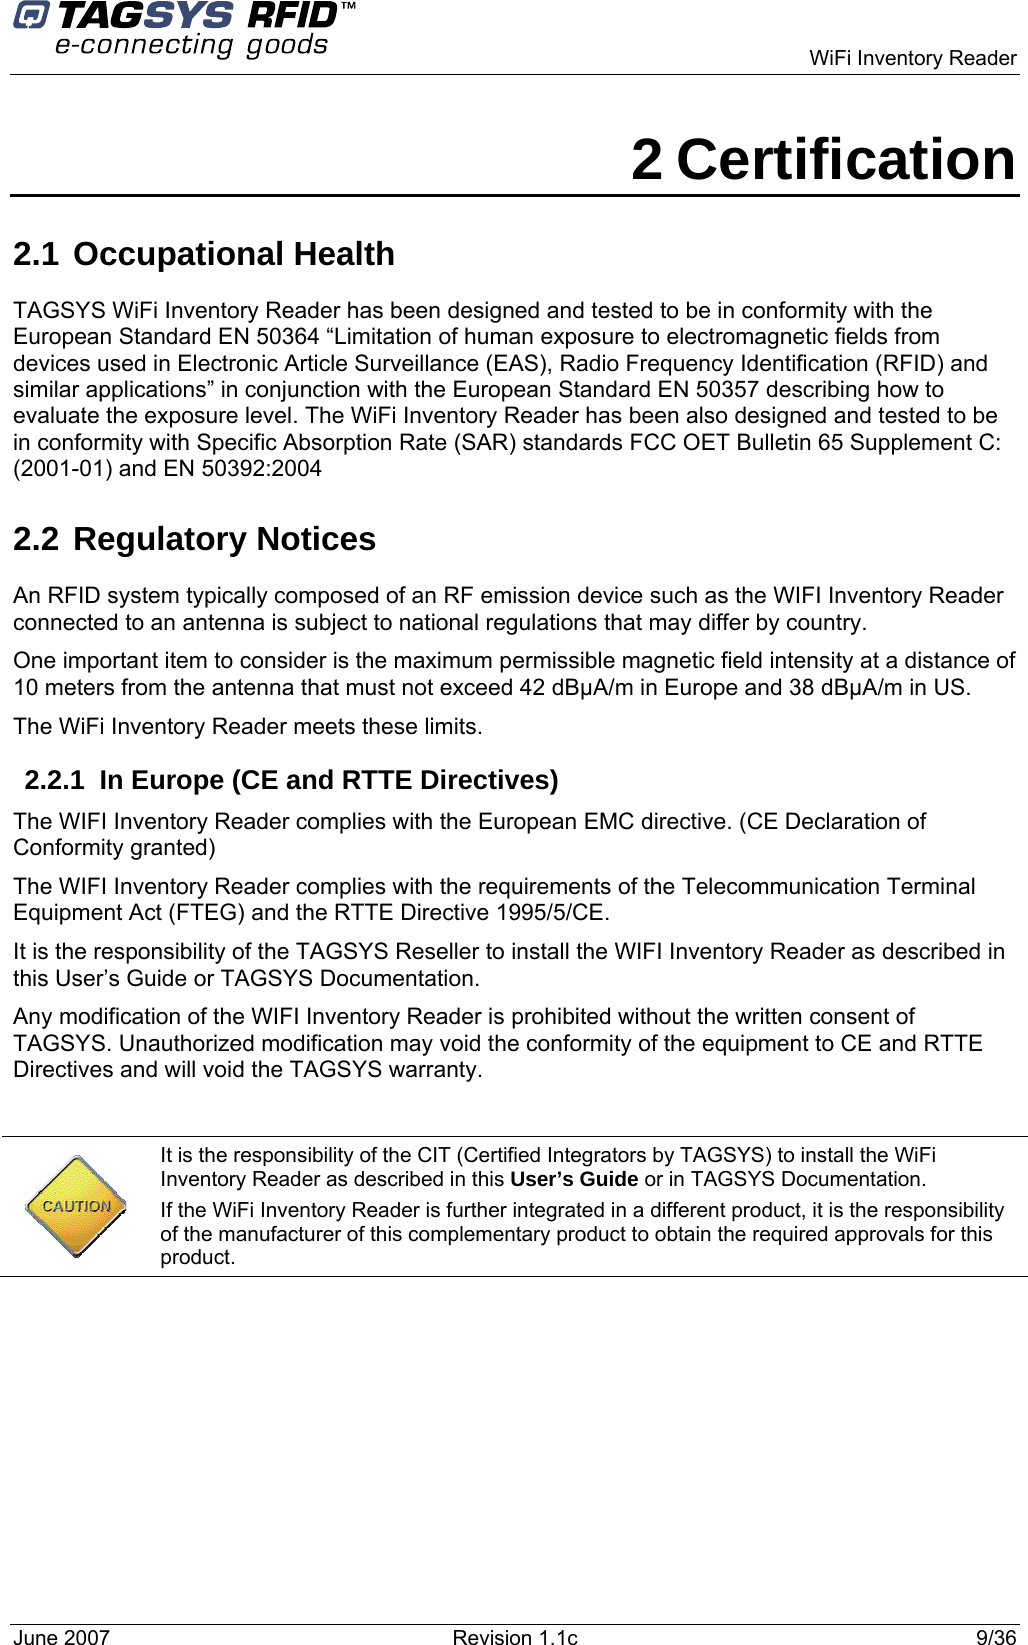    WiFi Inventory Reader 2 Certification 2.1 Occupational Health  TAGSYS WiFi Inventory Reader has been designed and tested to be in conformity with the European Standard EN 50364 “Limitation of human exposure to electromagnetic fields from devices used in Electronic Article Surveillance (EAS), Radio Frequency Identification (RFID) and similar applications” in conjunction with the European Standard EN 50357 describing how to evaluate the exposure level. The WiFi Inventory Reader has been also designed and tested to be in conformity with Specific Absorption Rate (SAR) standards FCC OET Bulletin 65 Supplement C: (2001-01) and EN 50392:2004 2.2 Regulatory Notices An RFID system typically composed of an RF emission device such as the WIFI Inventory Reader connected to an antenna is subject to national regulations that may differ by country. One important item to consider is the maximum permissible magnetic field intensity at a distance of 10 meters from the antenna that must not exceed 42 dBµA/m in Europe and 38 dBµA/m in US. The WiFi Inventory Reader meets these limits.  2.2.1  In Europe (CE and RTTE Directives)  The WIFI Inventory Reader complies with the European EMC directive. (CE Declaration of Conformity granted) The WIFI Inventory Reader complies with the requirements of the Telecommunication Terminal Equipment Act (FTEG) and the RTTE Directive 1995/5/CE. It is the responsibility of the TAGSYS Reseller to install the WIFI Inventory Reader as described in this User’s Guide or TAGSYS Documentation. Any modification of the WIFI Inventory Reader is prohibited without the written consent of TAGSYS. Unauthorized modification may void the conformity of the equipment to CE and RTTE Directives and will void the TAGSYS warranty.   It is the responsibility of the CIT (Certified Integrators by TAGSYS) to install the WiFi Inventory Reader as described in this User’s Guide or in TAGSYS Documentation. If the WiFi Inventory Reader is further integrated in a different product, it is the responsibility of the manufacturer of this complementary product to obtain the required approvals for this product. June 2007  Revision 1.1c  9/36  